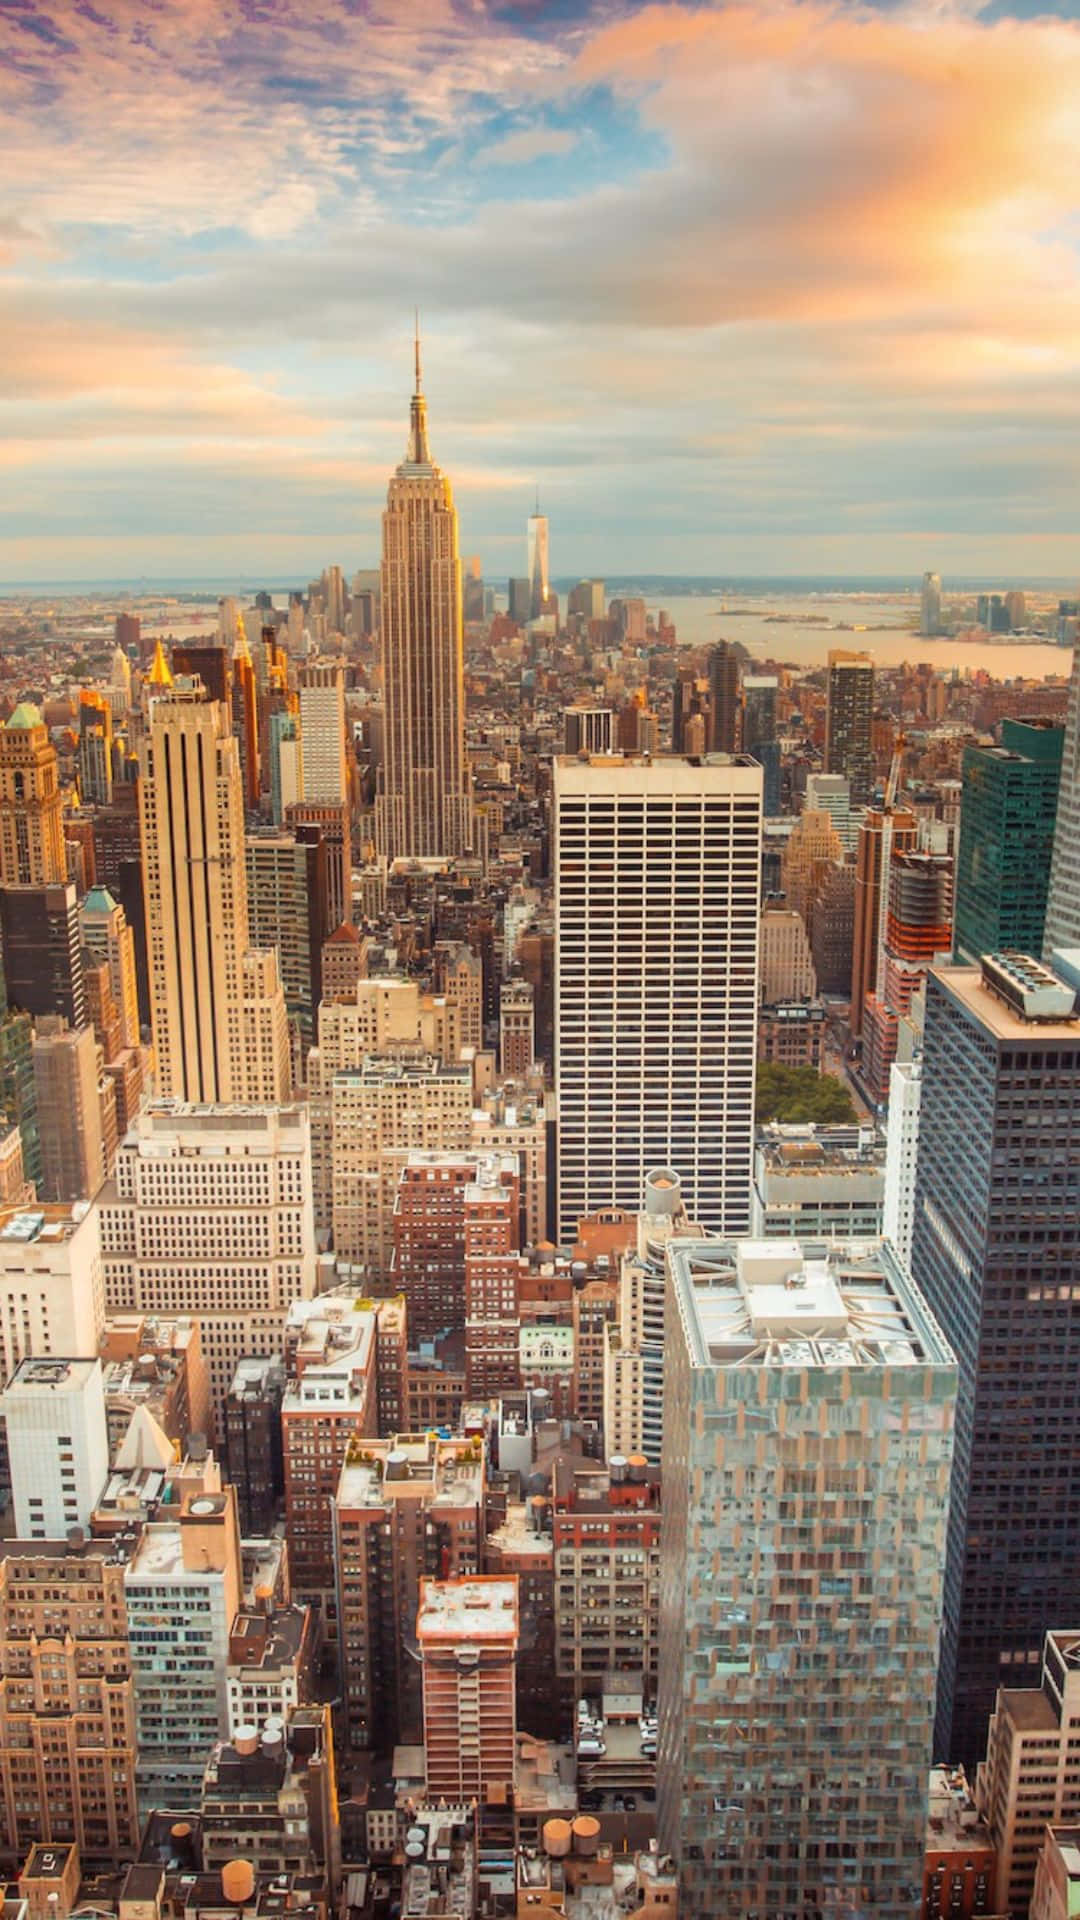 Explore New York City with an Android